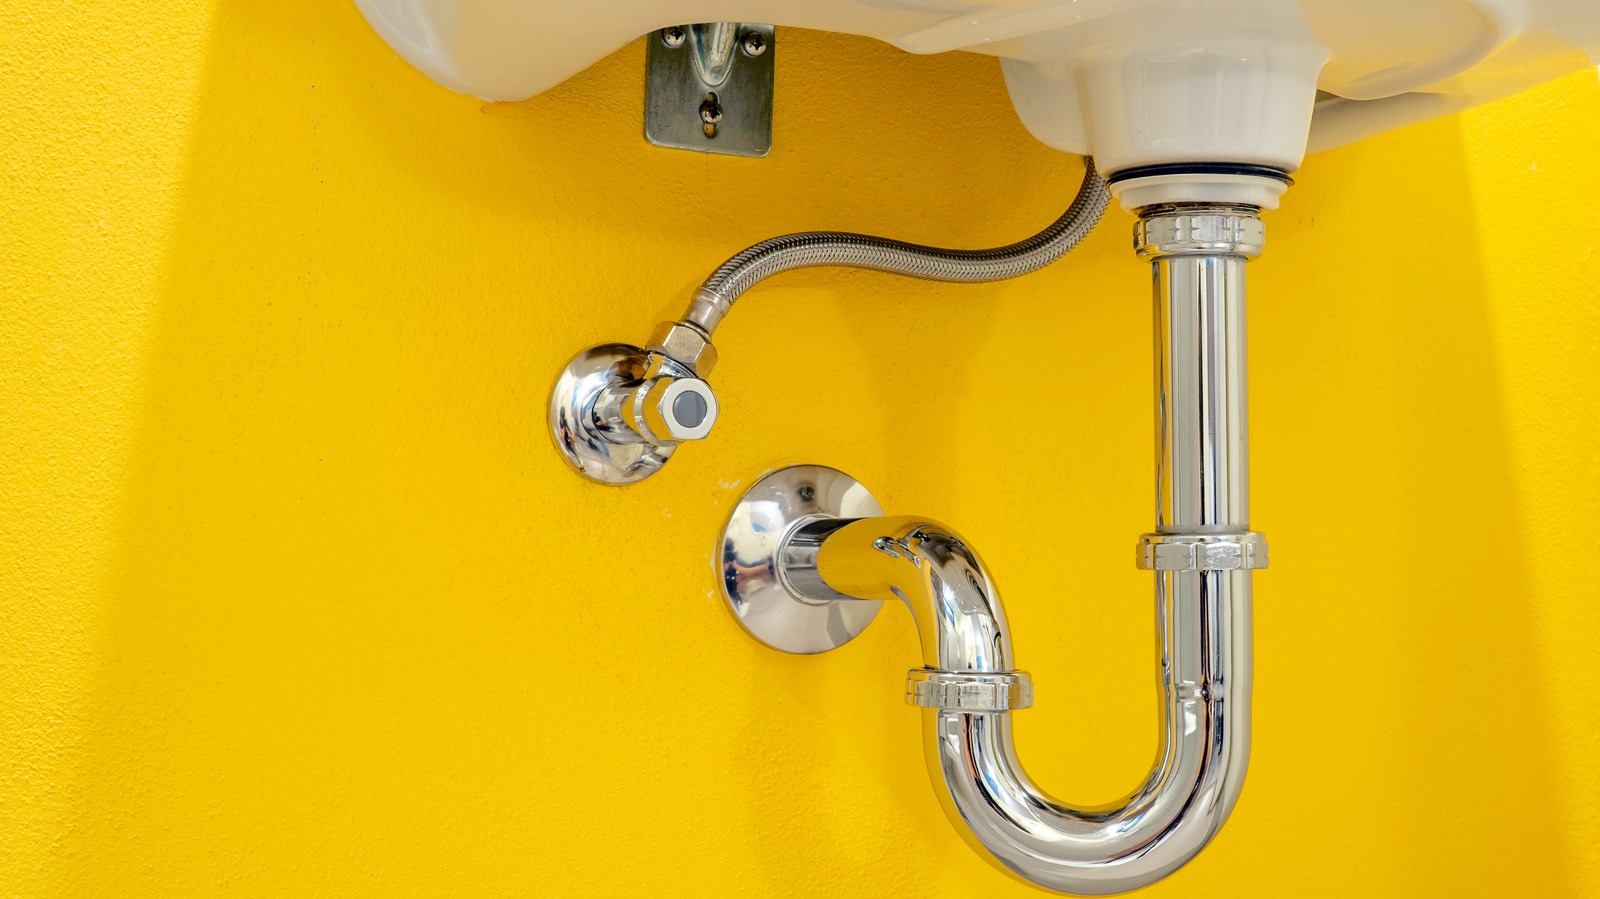 https://www.housedigest.com/img/gallery/5-things-to-consider-if-you-dont-want-to-clog-your-drain/l-intro-1662643778.jpg